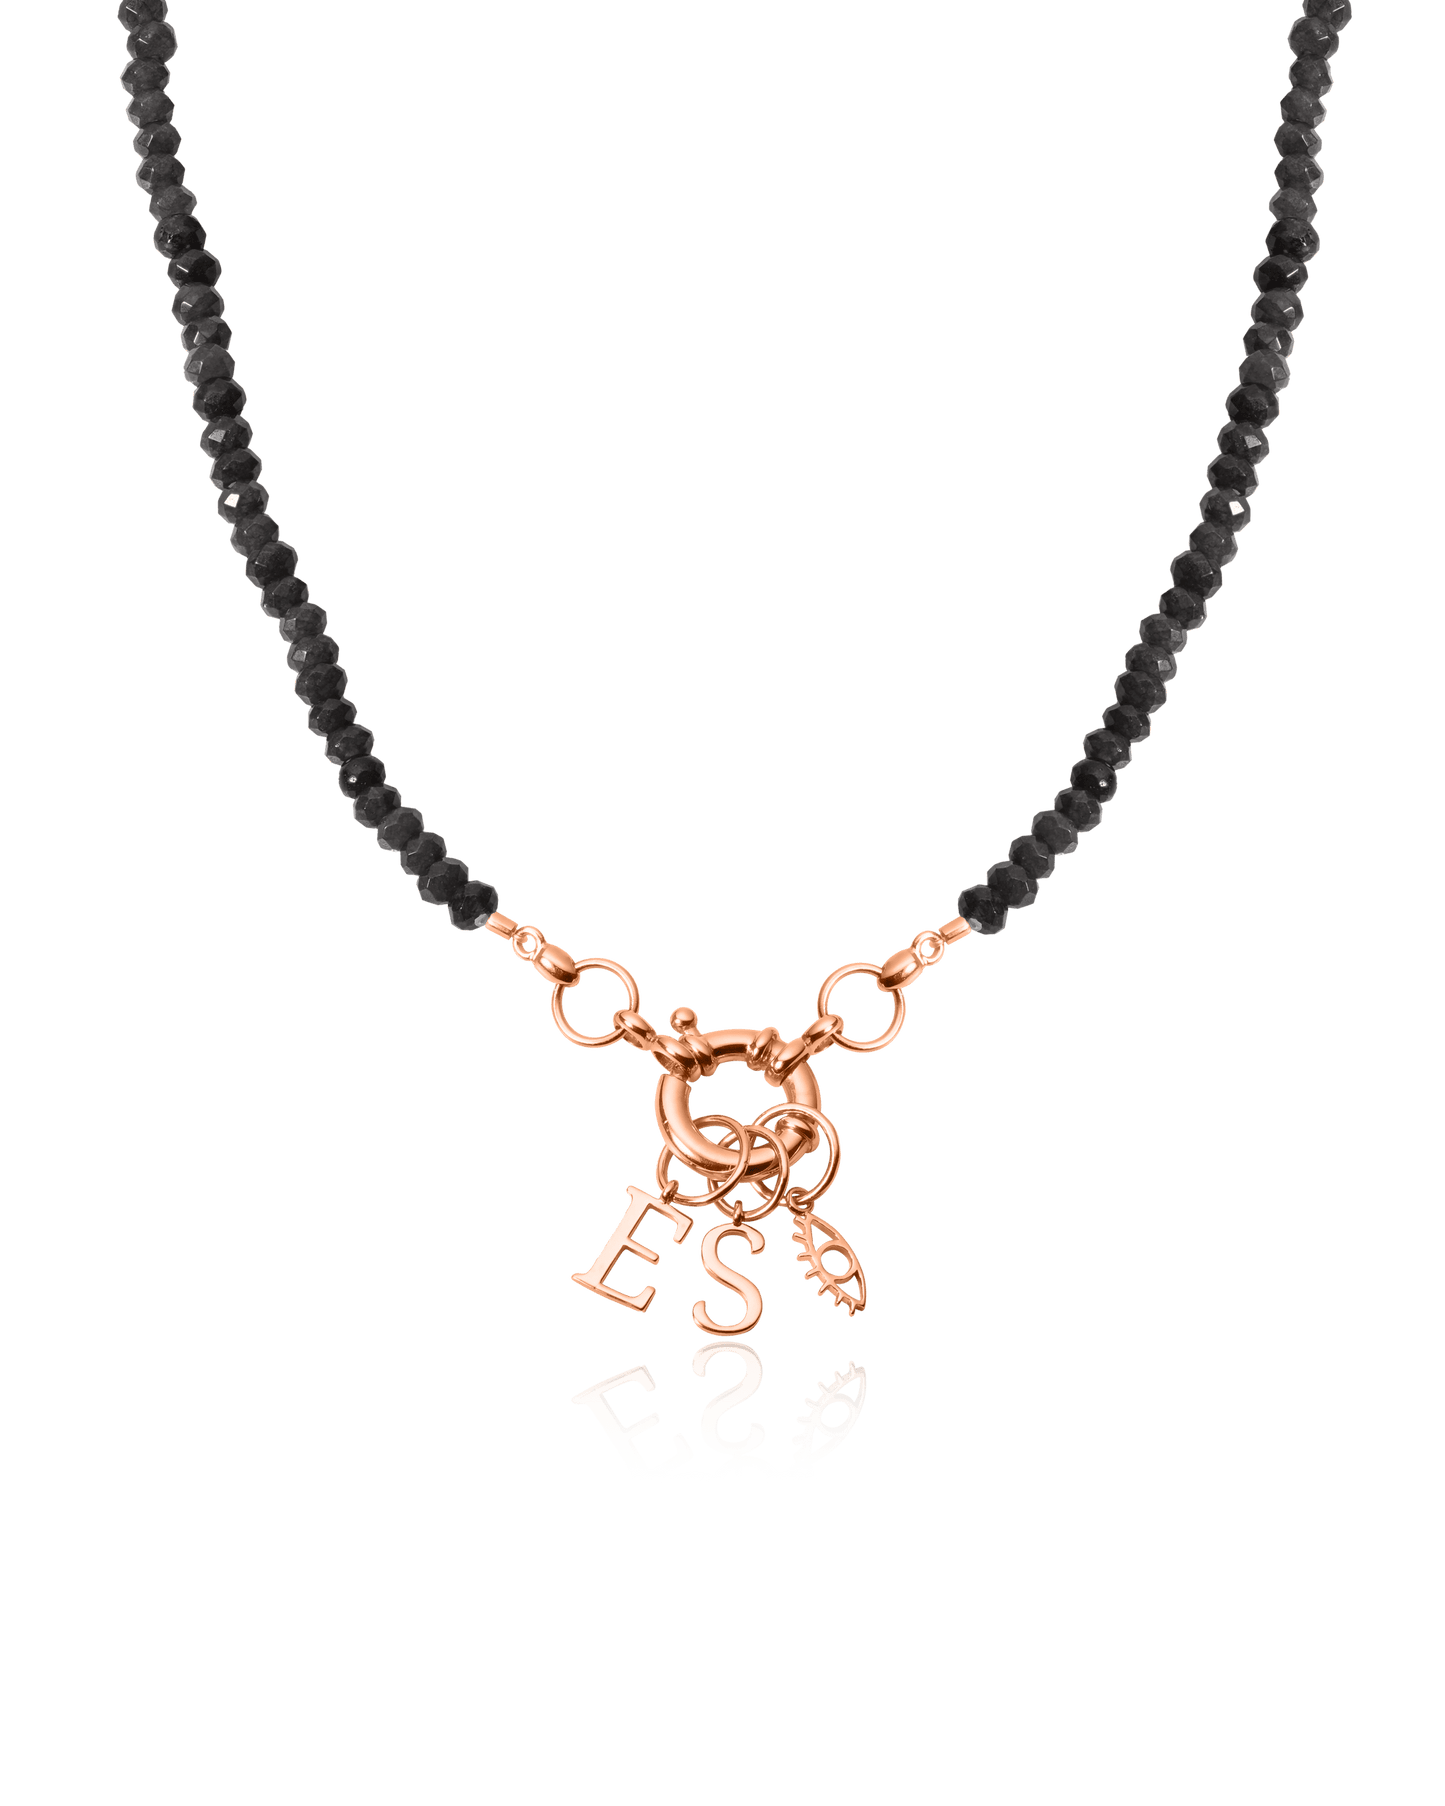 Green Jade Charm Lock Necklace - 18K Rose Vermeil Necklaces magal-dev Glass Beads Black Spinnel 1 Charm 16"